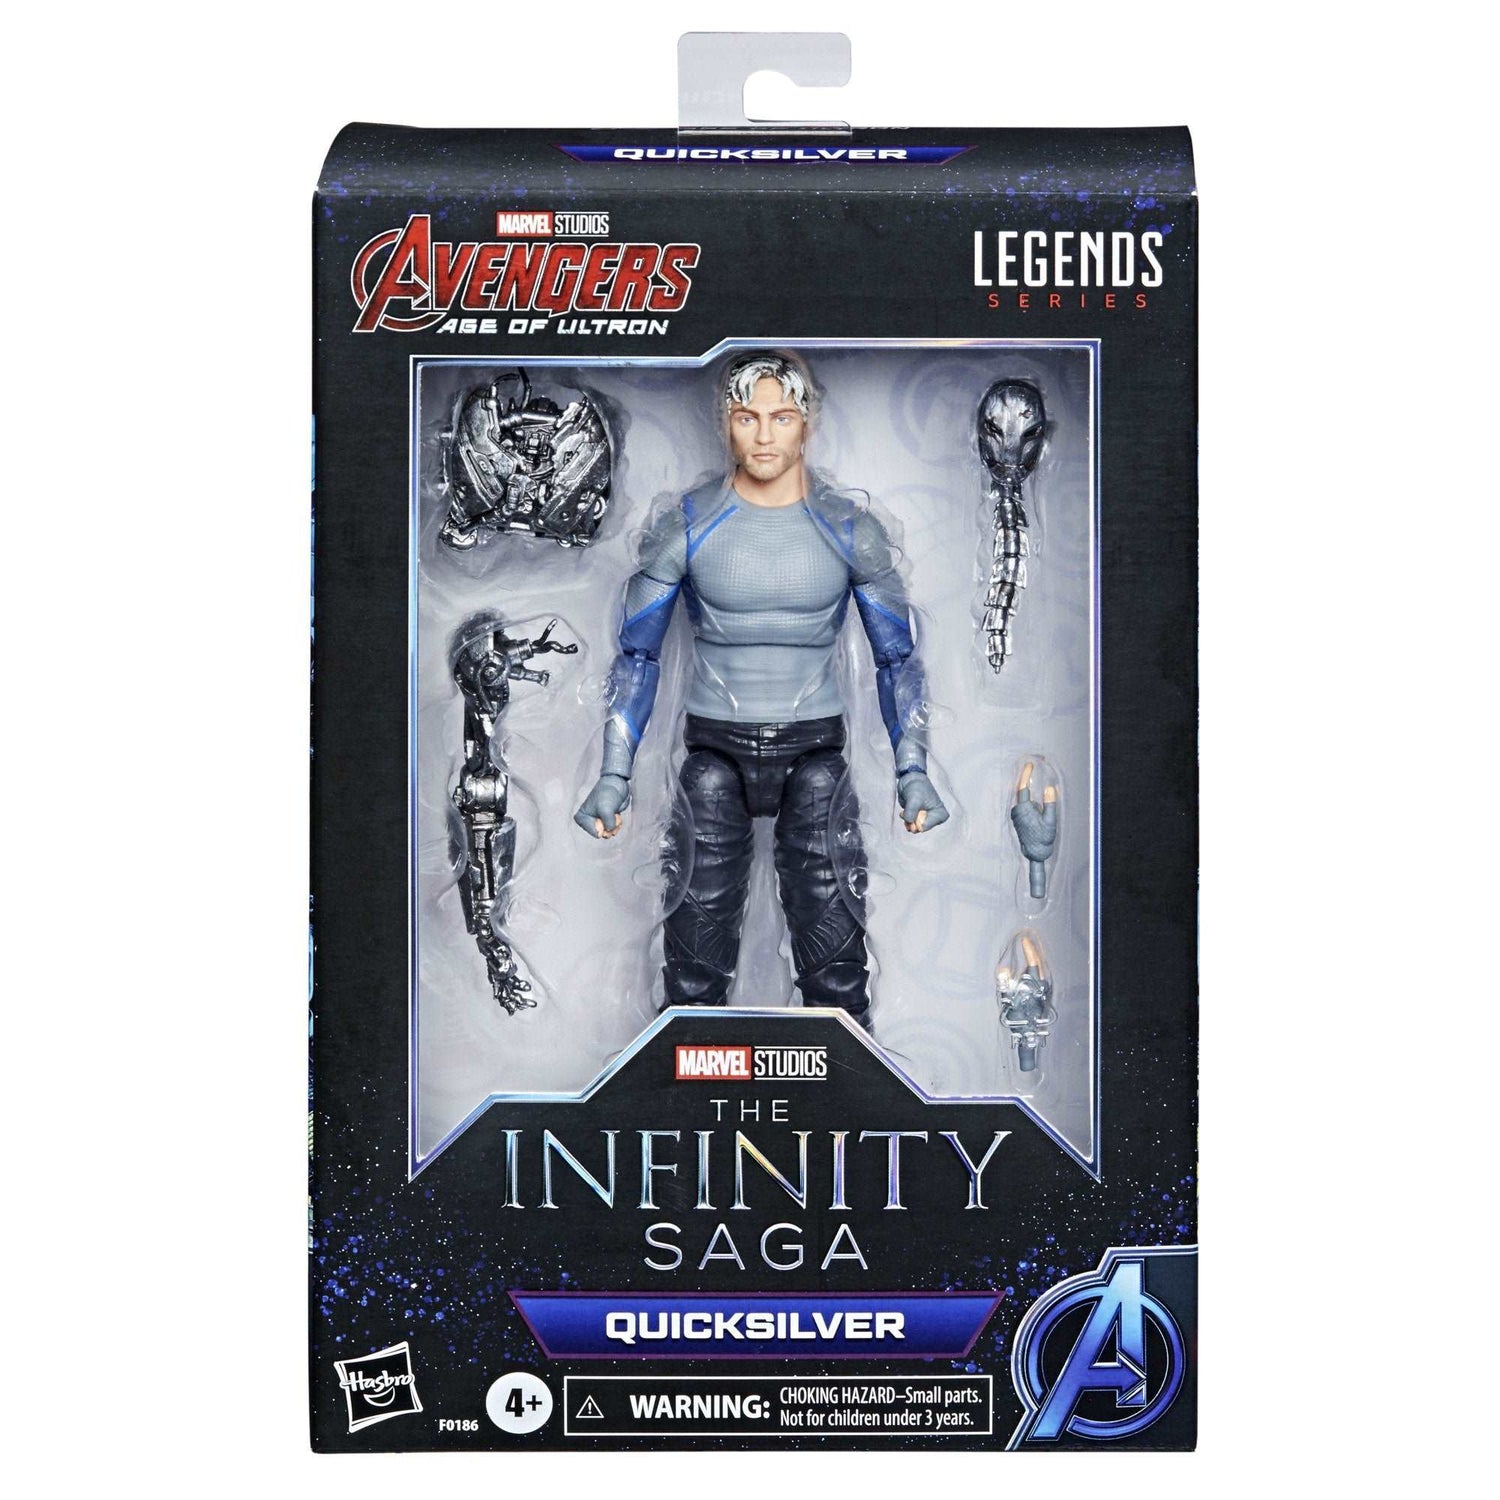 Hasbro Marvel Legends Series Avengers Age of Ultron Quicksilver figure in packaging